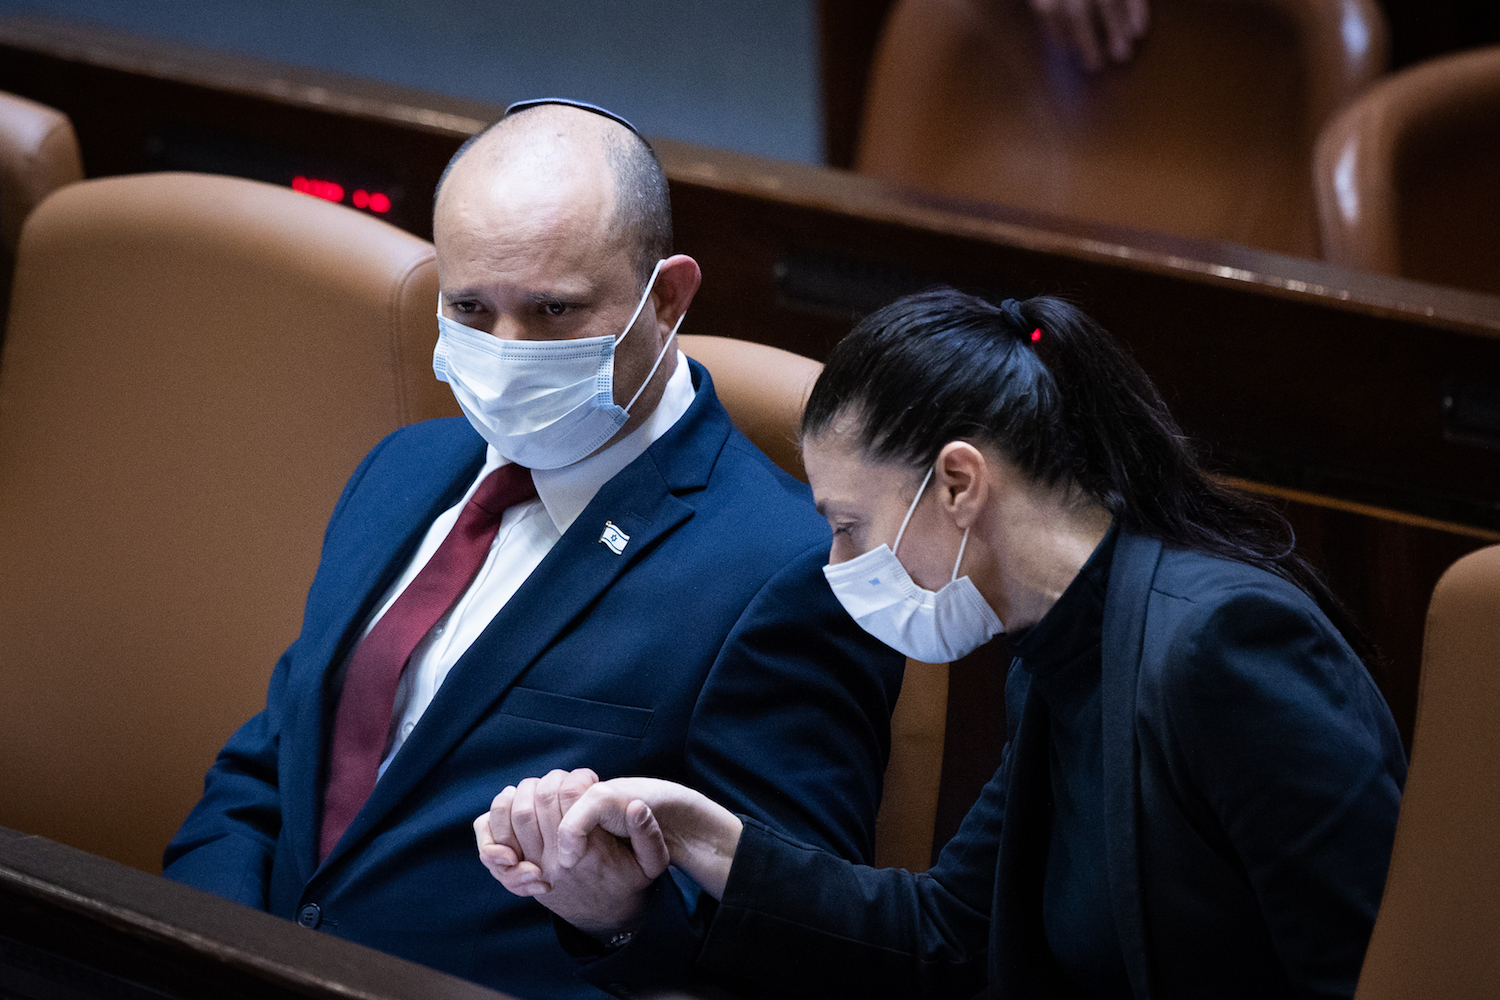 Naftali Bennett and Merav Michaeli hold hands during a debate on the Citizenship Law in the Knesset, July 6, 2021. (Yonatan Sindel/Flash90)